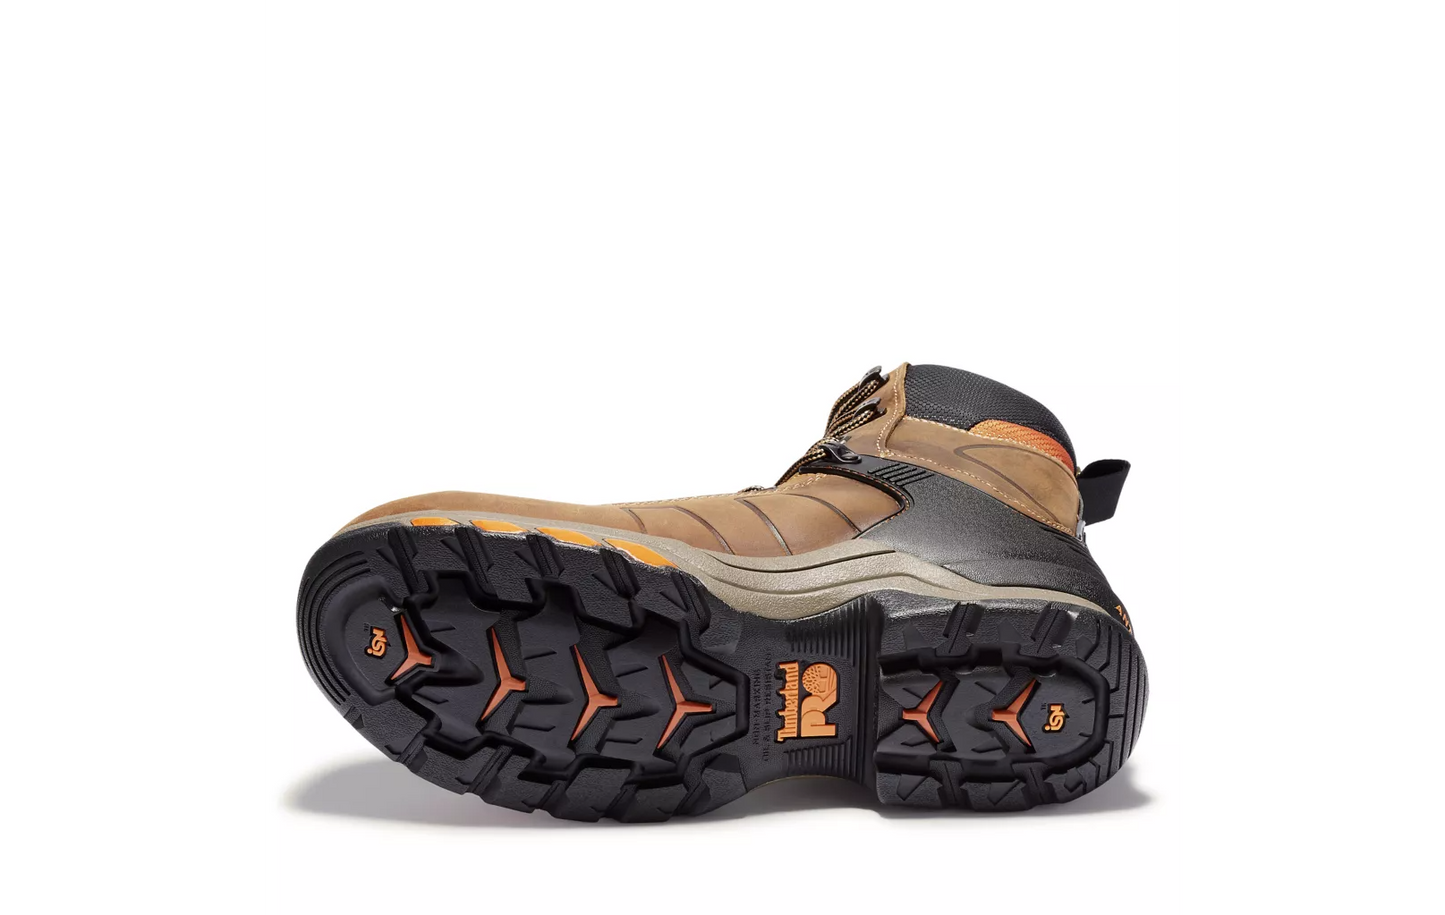 Timberland Pro Hypercharge 8" Safety